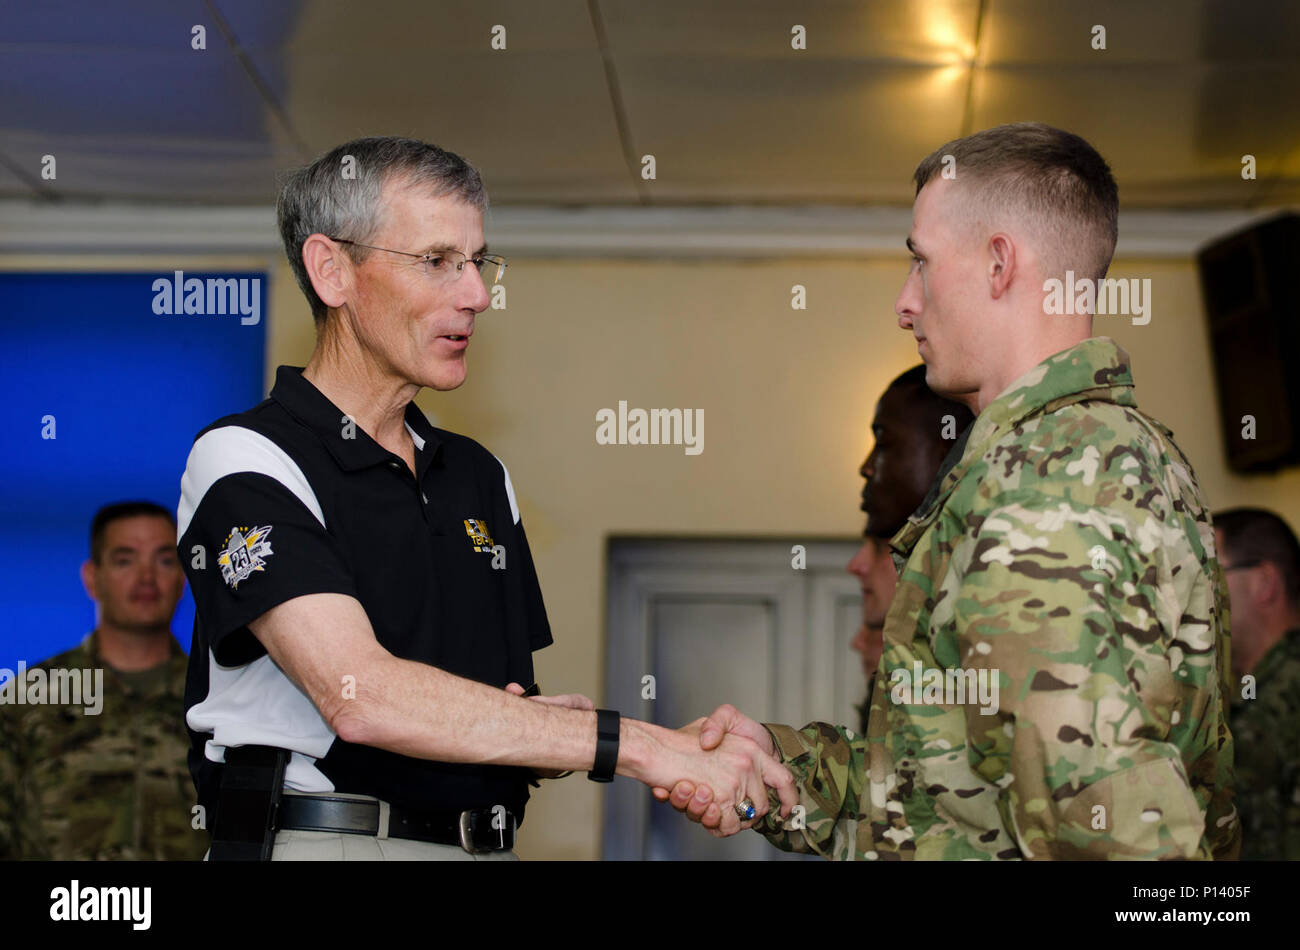 Acting Secretary of the Army, Mr. Robert M. Speer, presents a coin to a soldier from the 497th Combat Sustainment Support Battalion during his visit to Powidz, Poland on May 6, 2017. The 497th CSSB provides logistical support for Operation Atlantic Resolve, a U.S.-led effort to strengthen the NATO alliance and deter aggression in the region. Stock Photo